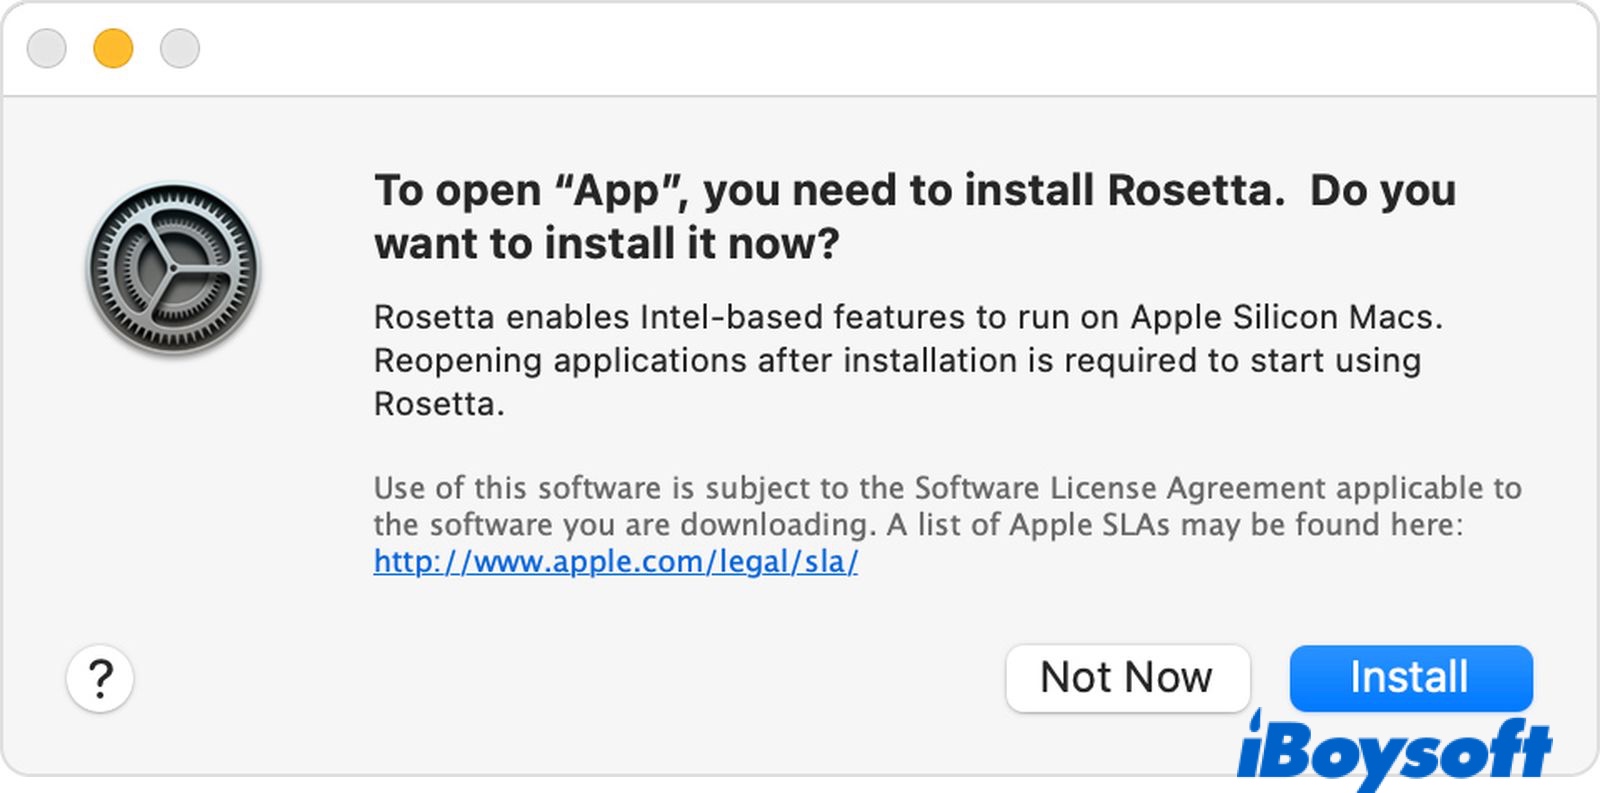 The notification asking you to install Rosetta 2 when opening an app for Intel Macs